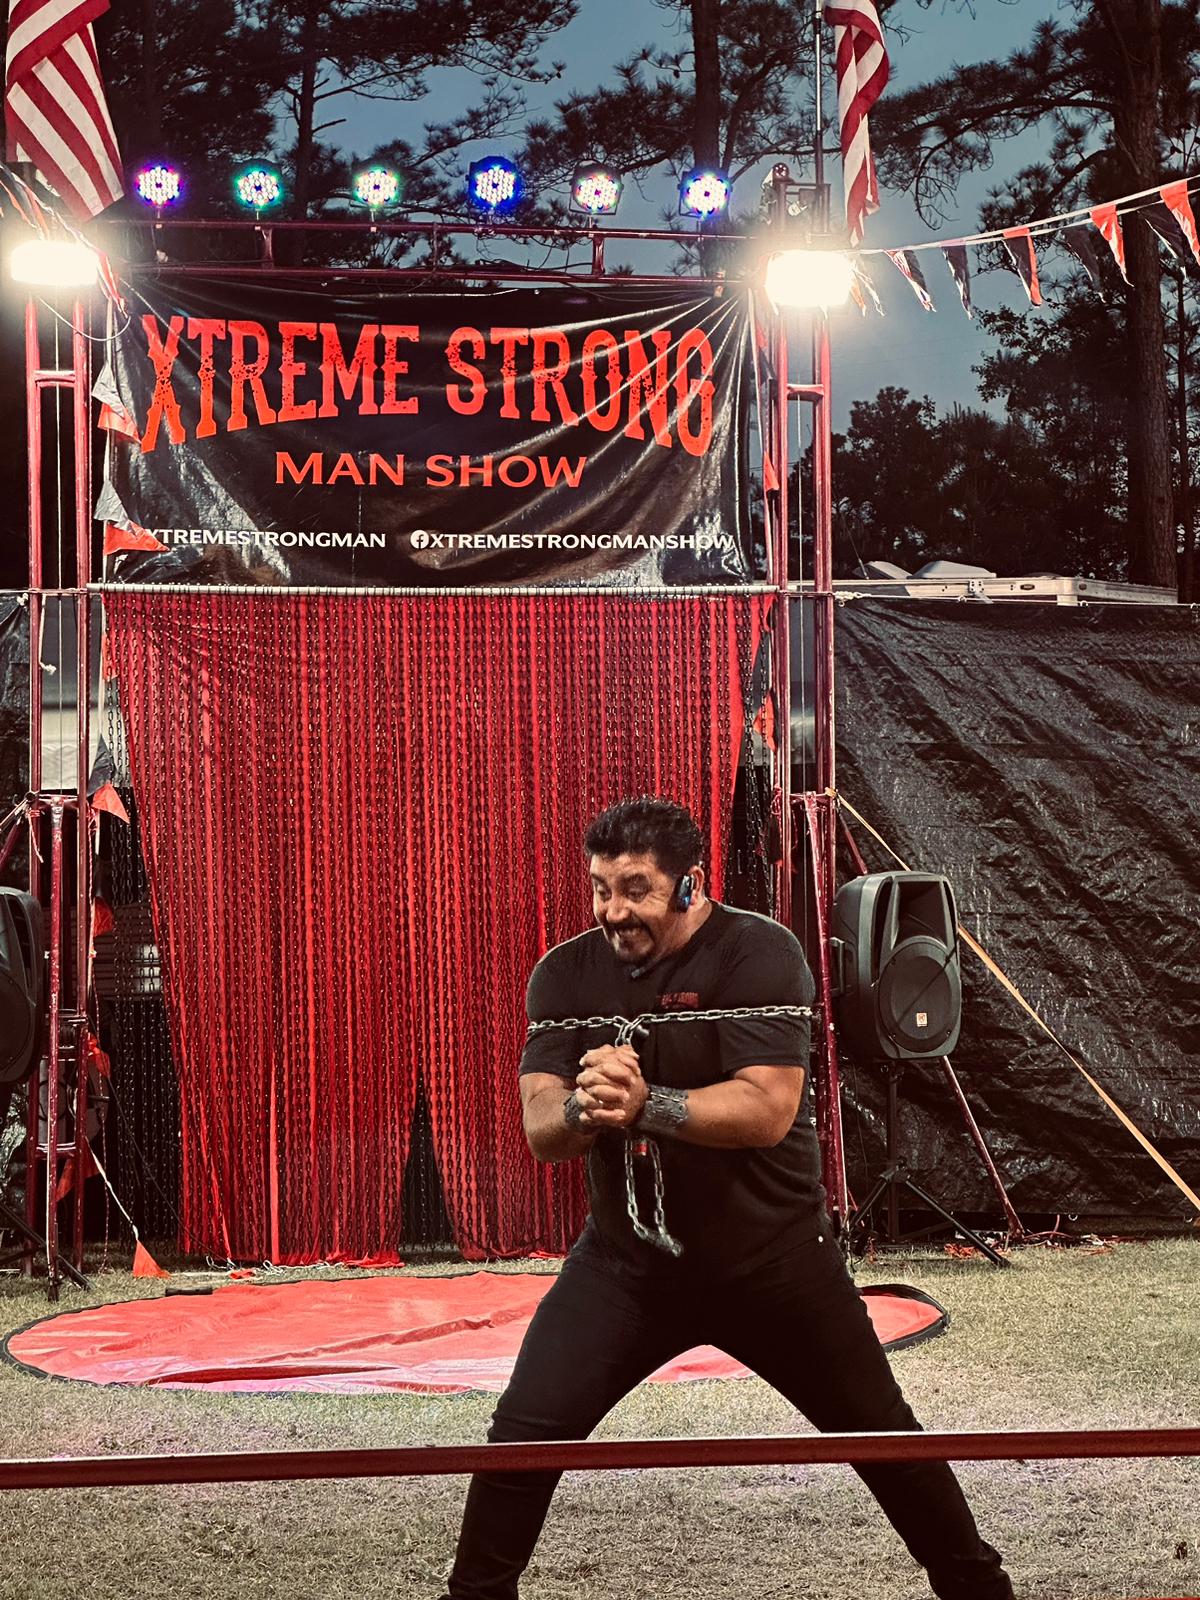 Xtreme Strong Man Show